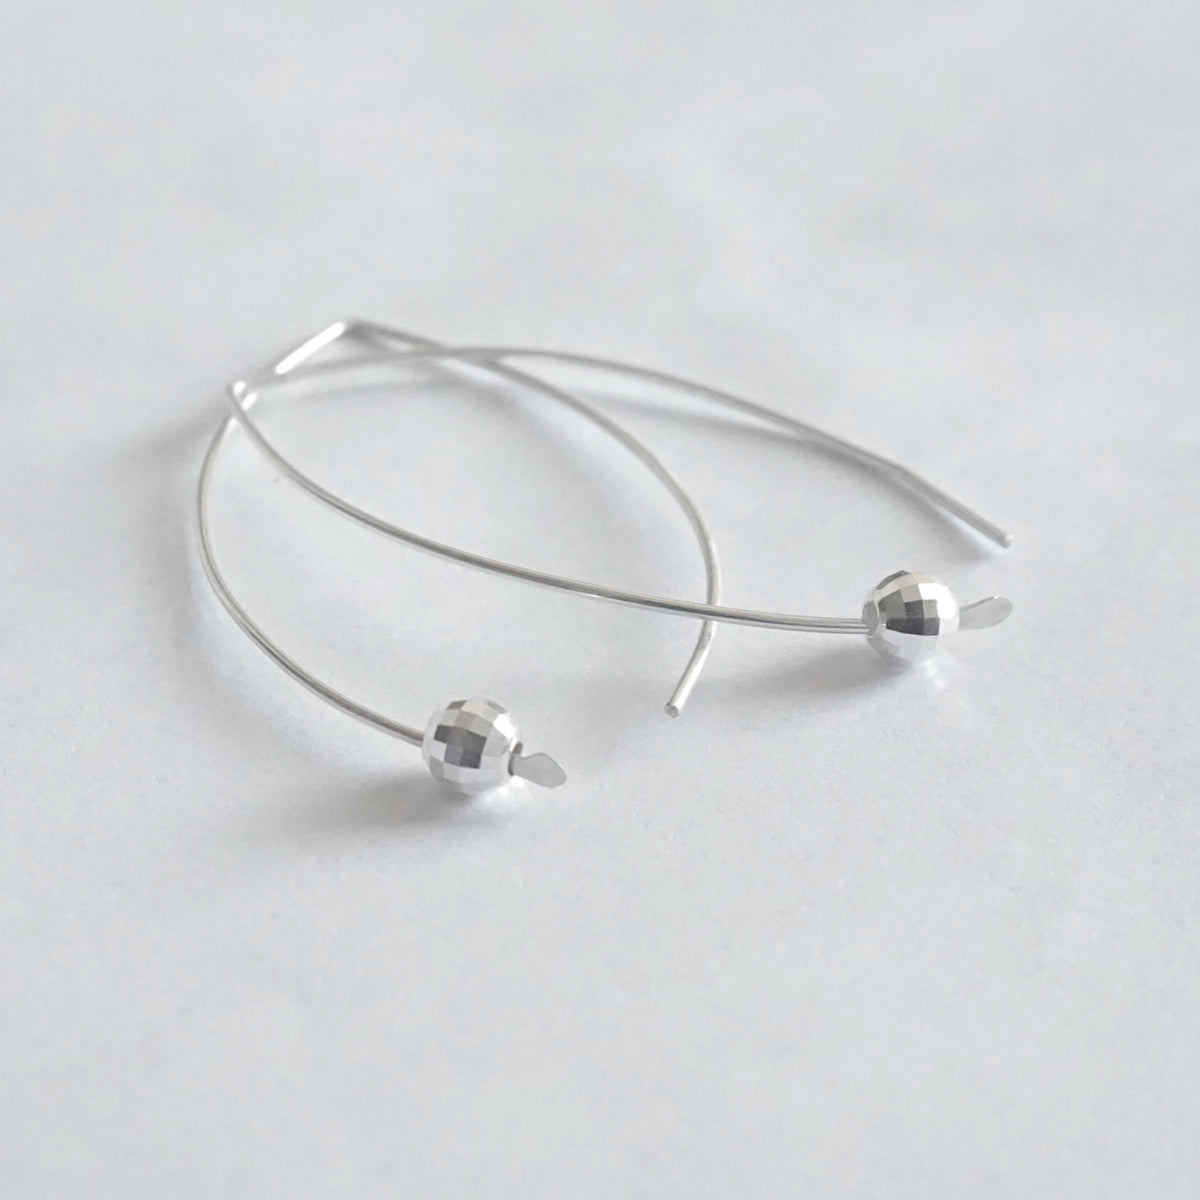 Contemporary Curved Sterling Silver Hand-Made Earrings w/ Silver Faceted Ball & Tapered End - 0266 - Virginia Wynne Designs